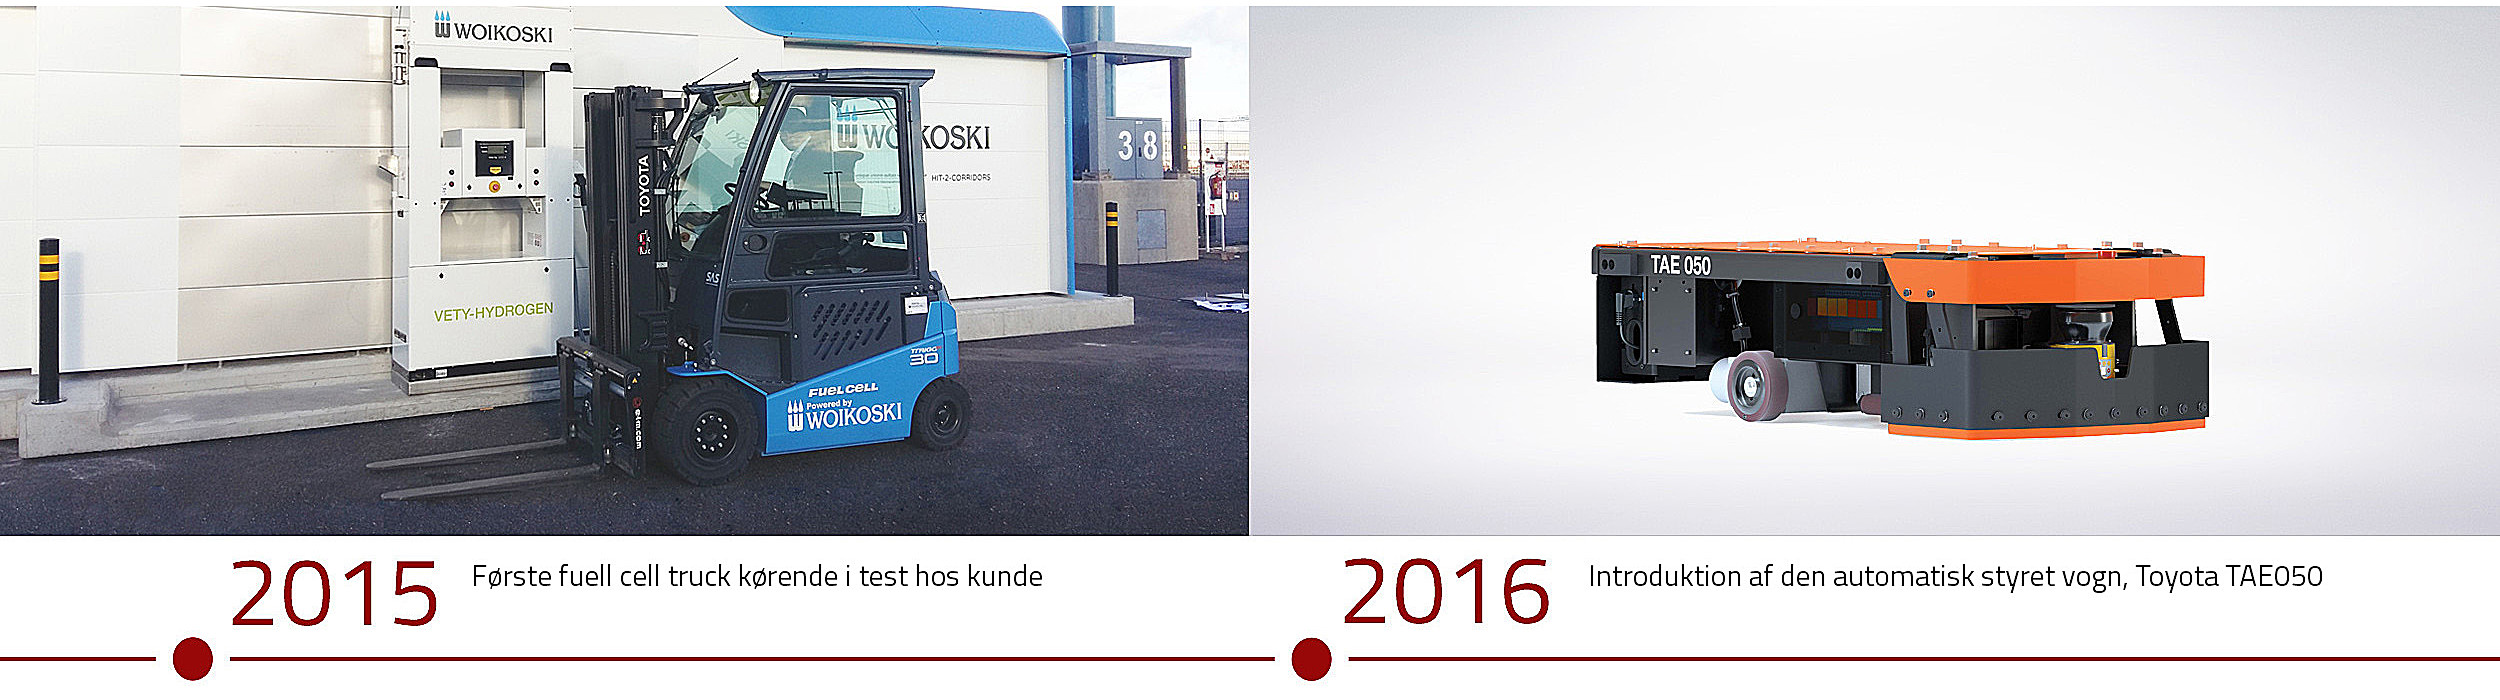 Historie Toyota Material Handling 2015 and 2016